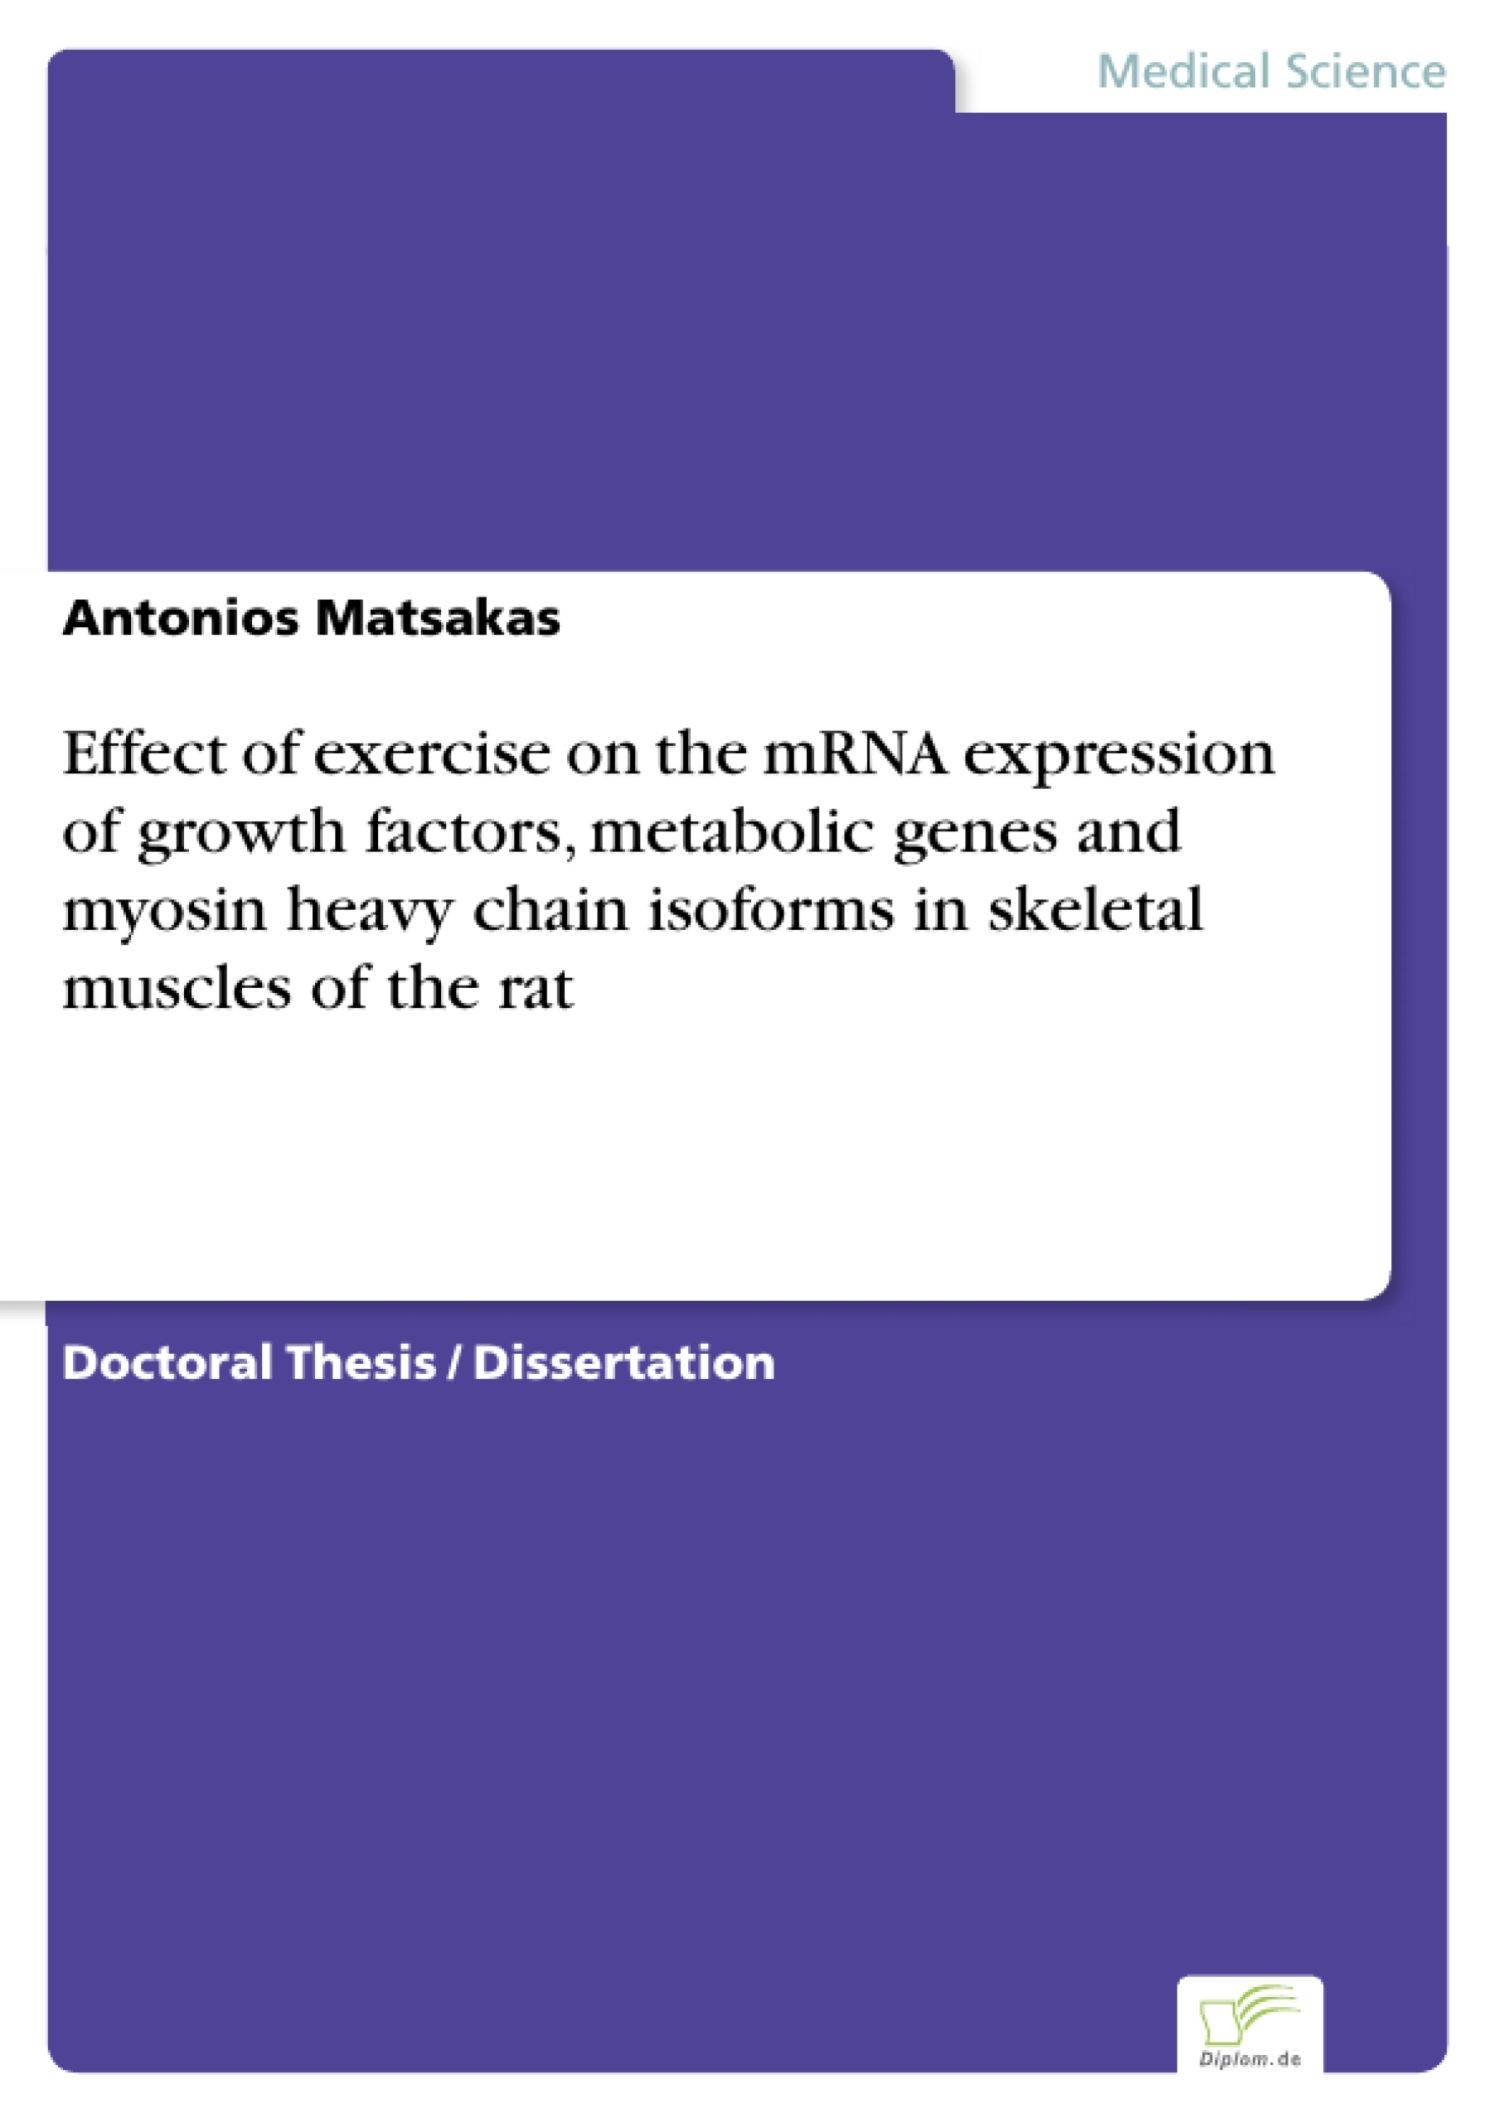 Effect of exercise on the mRNA expression of growth factors, metabolic genes and myosin heavy chain isoforms in skeletal muscles of the rat